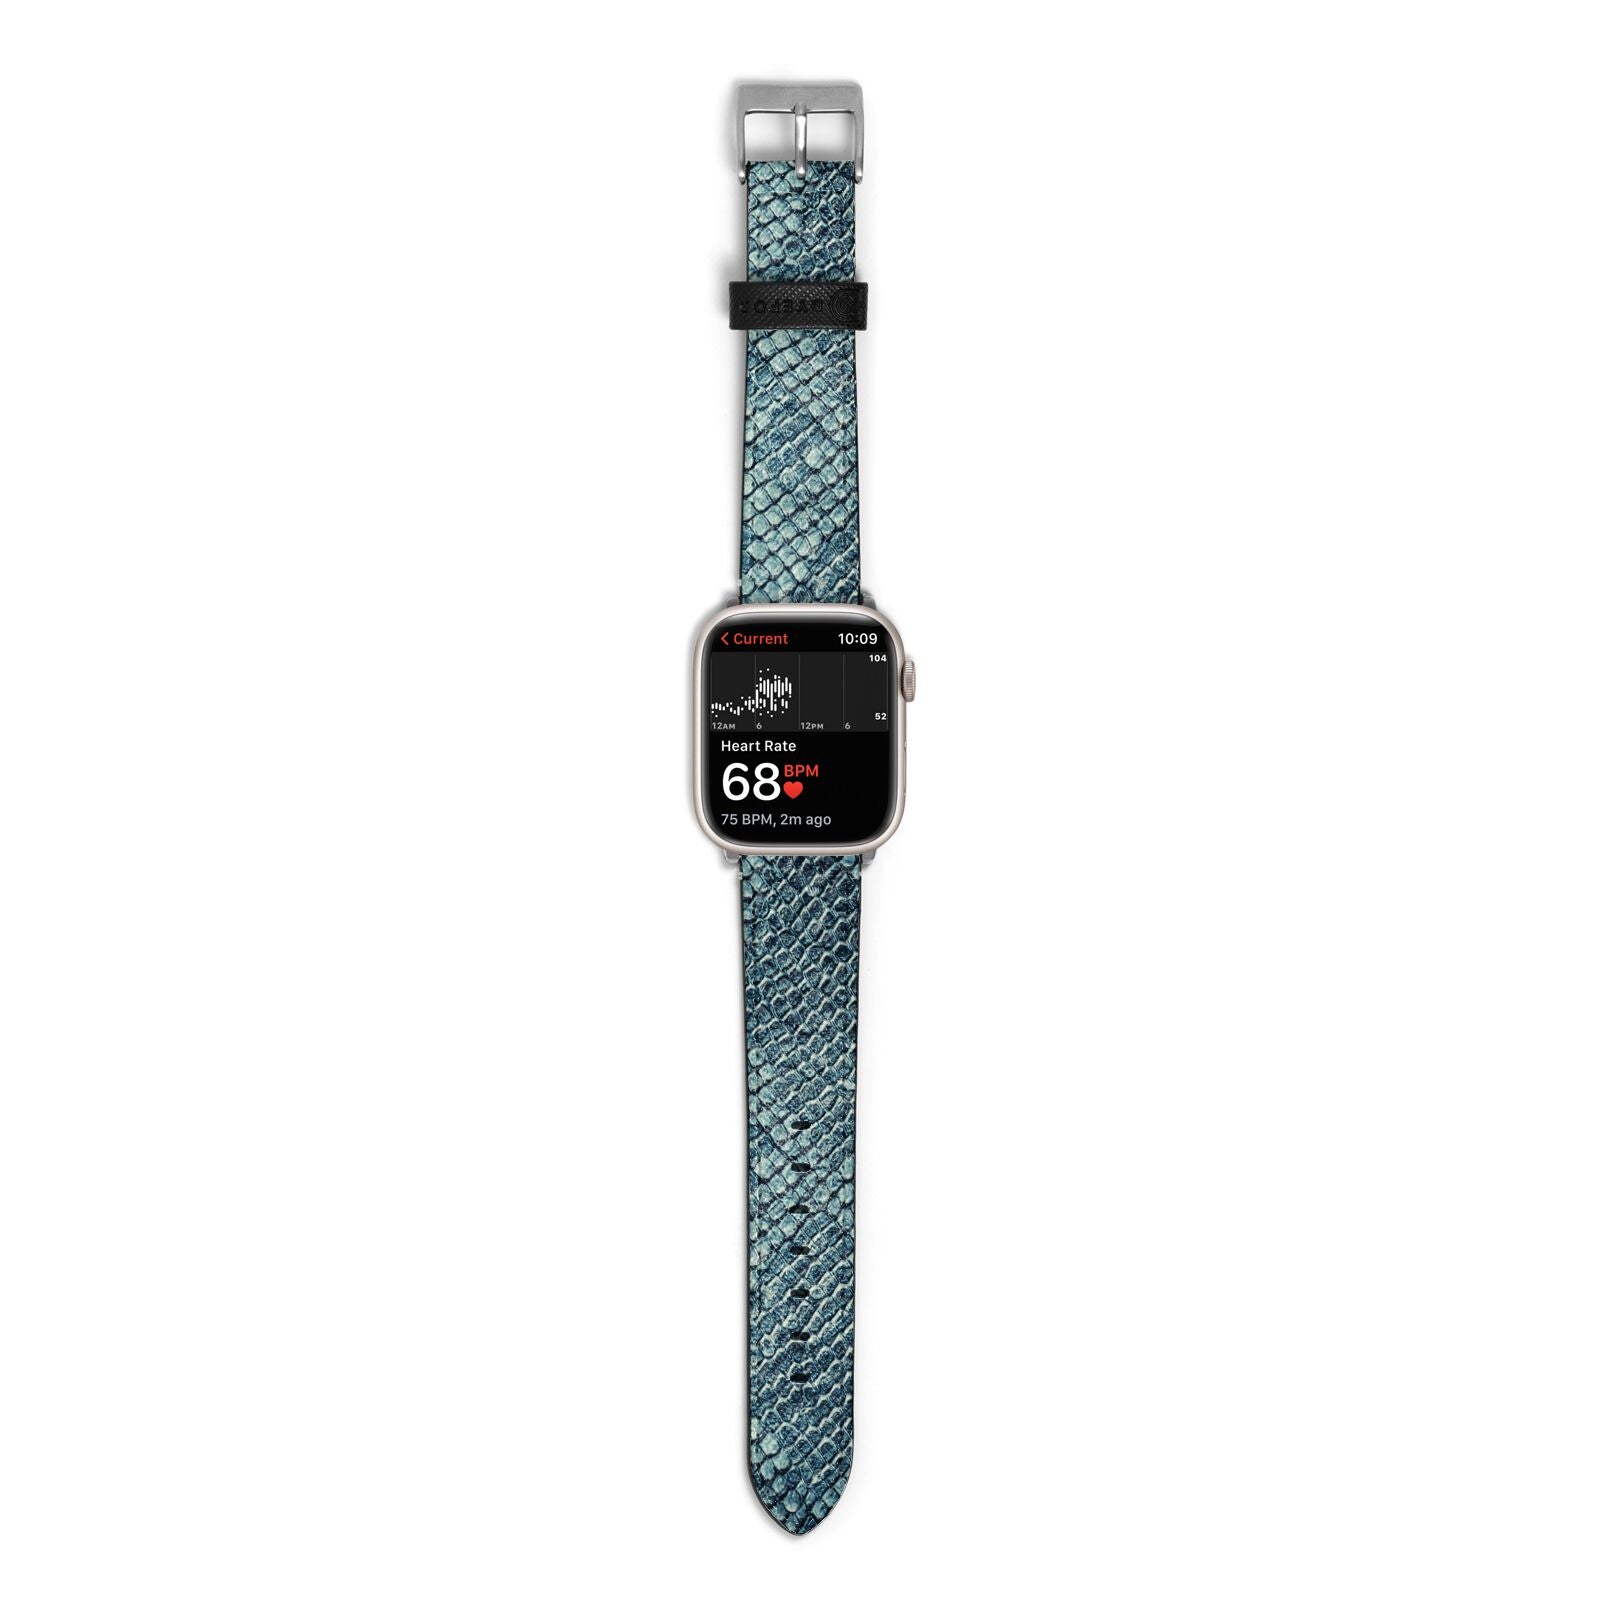 Teal Snakeskin Apple Watch Strap Size 38mm with Silver Hardware